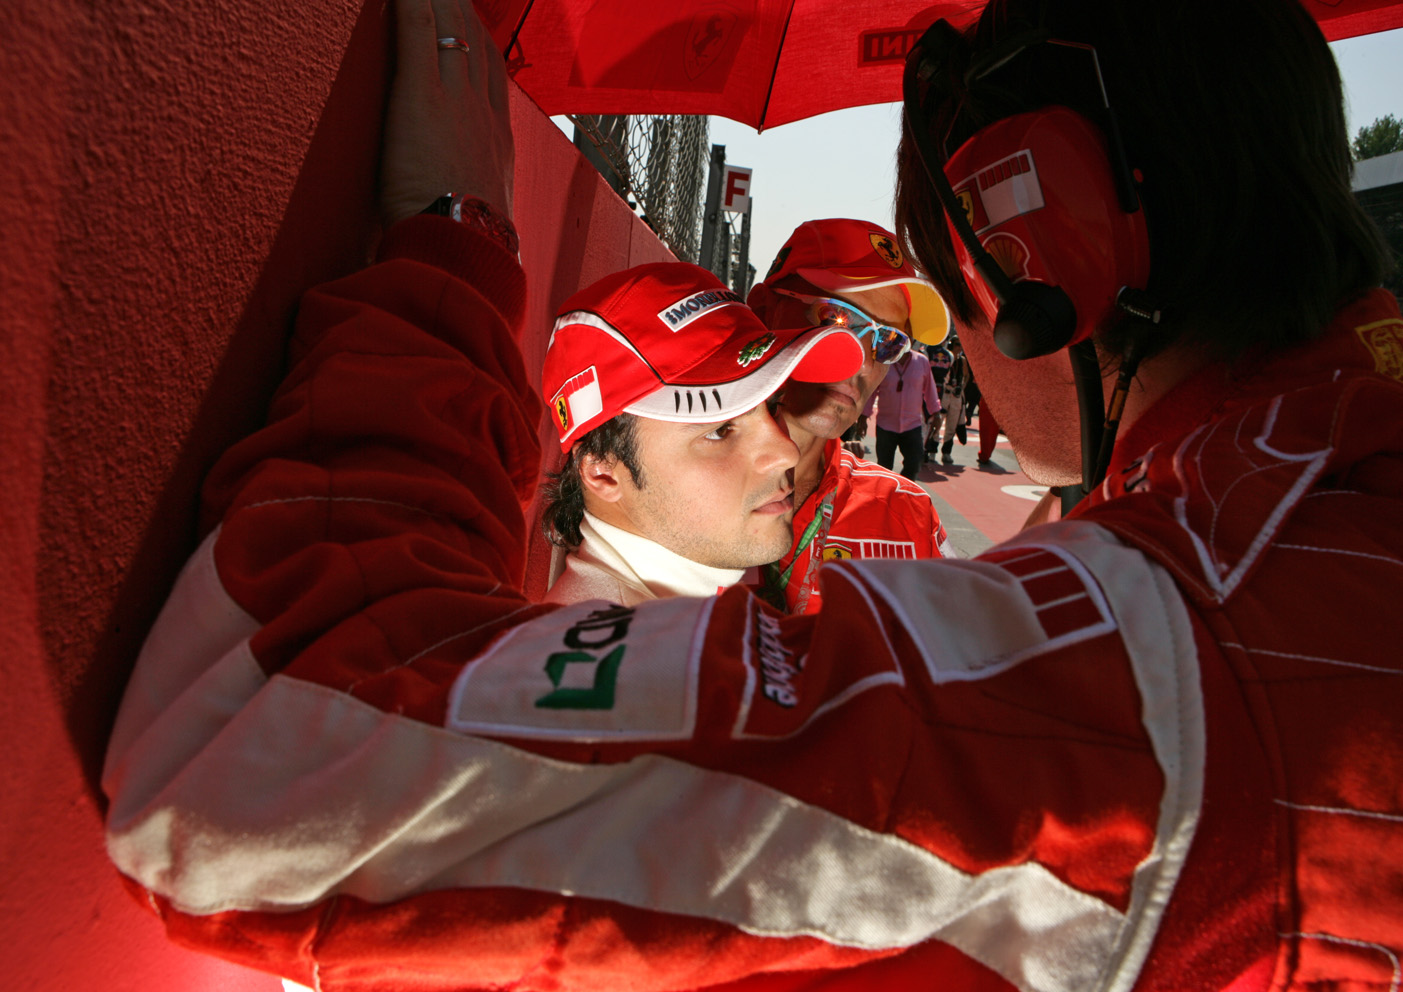 Felipe Massa talks to his team on the starting grid before the French Grand Prix 2007